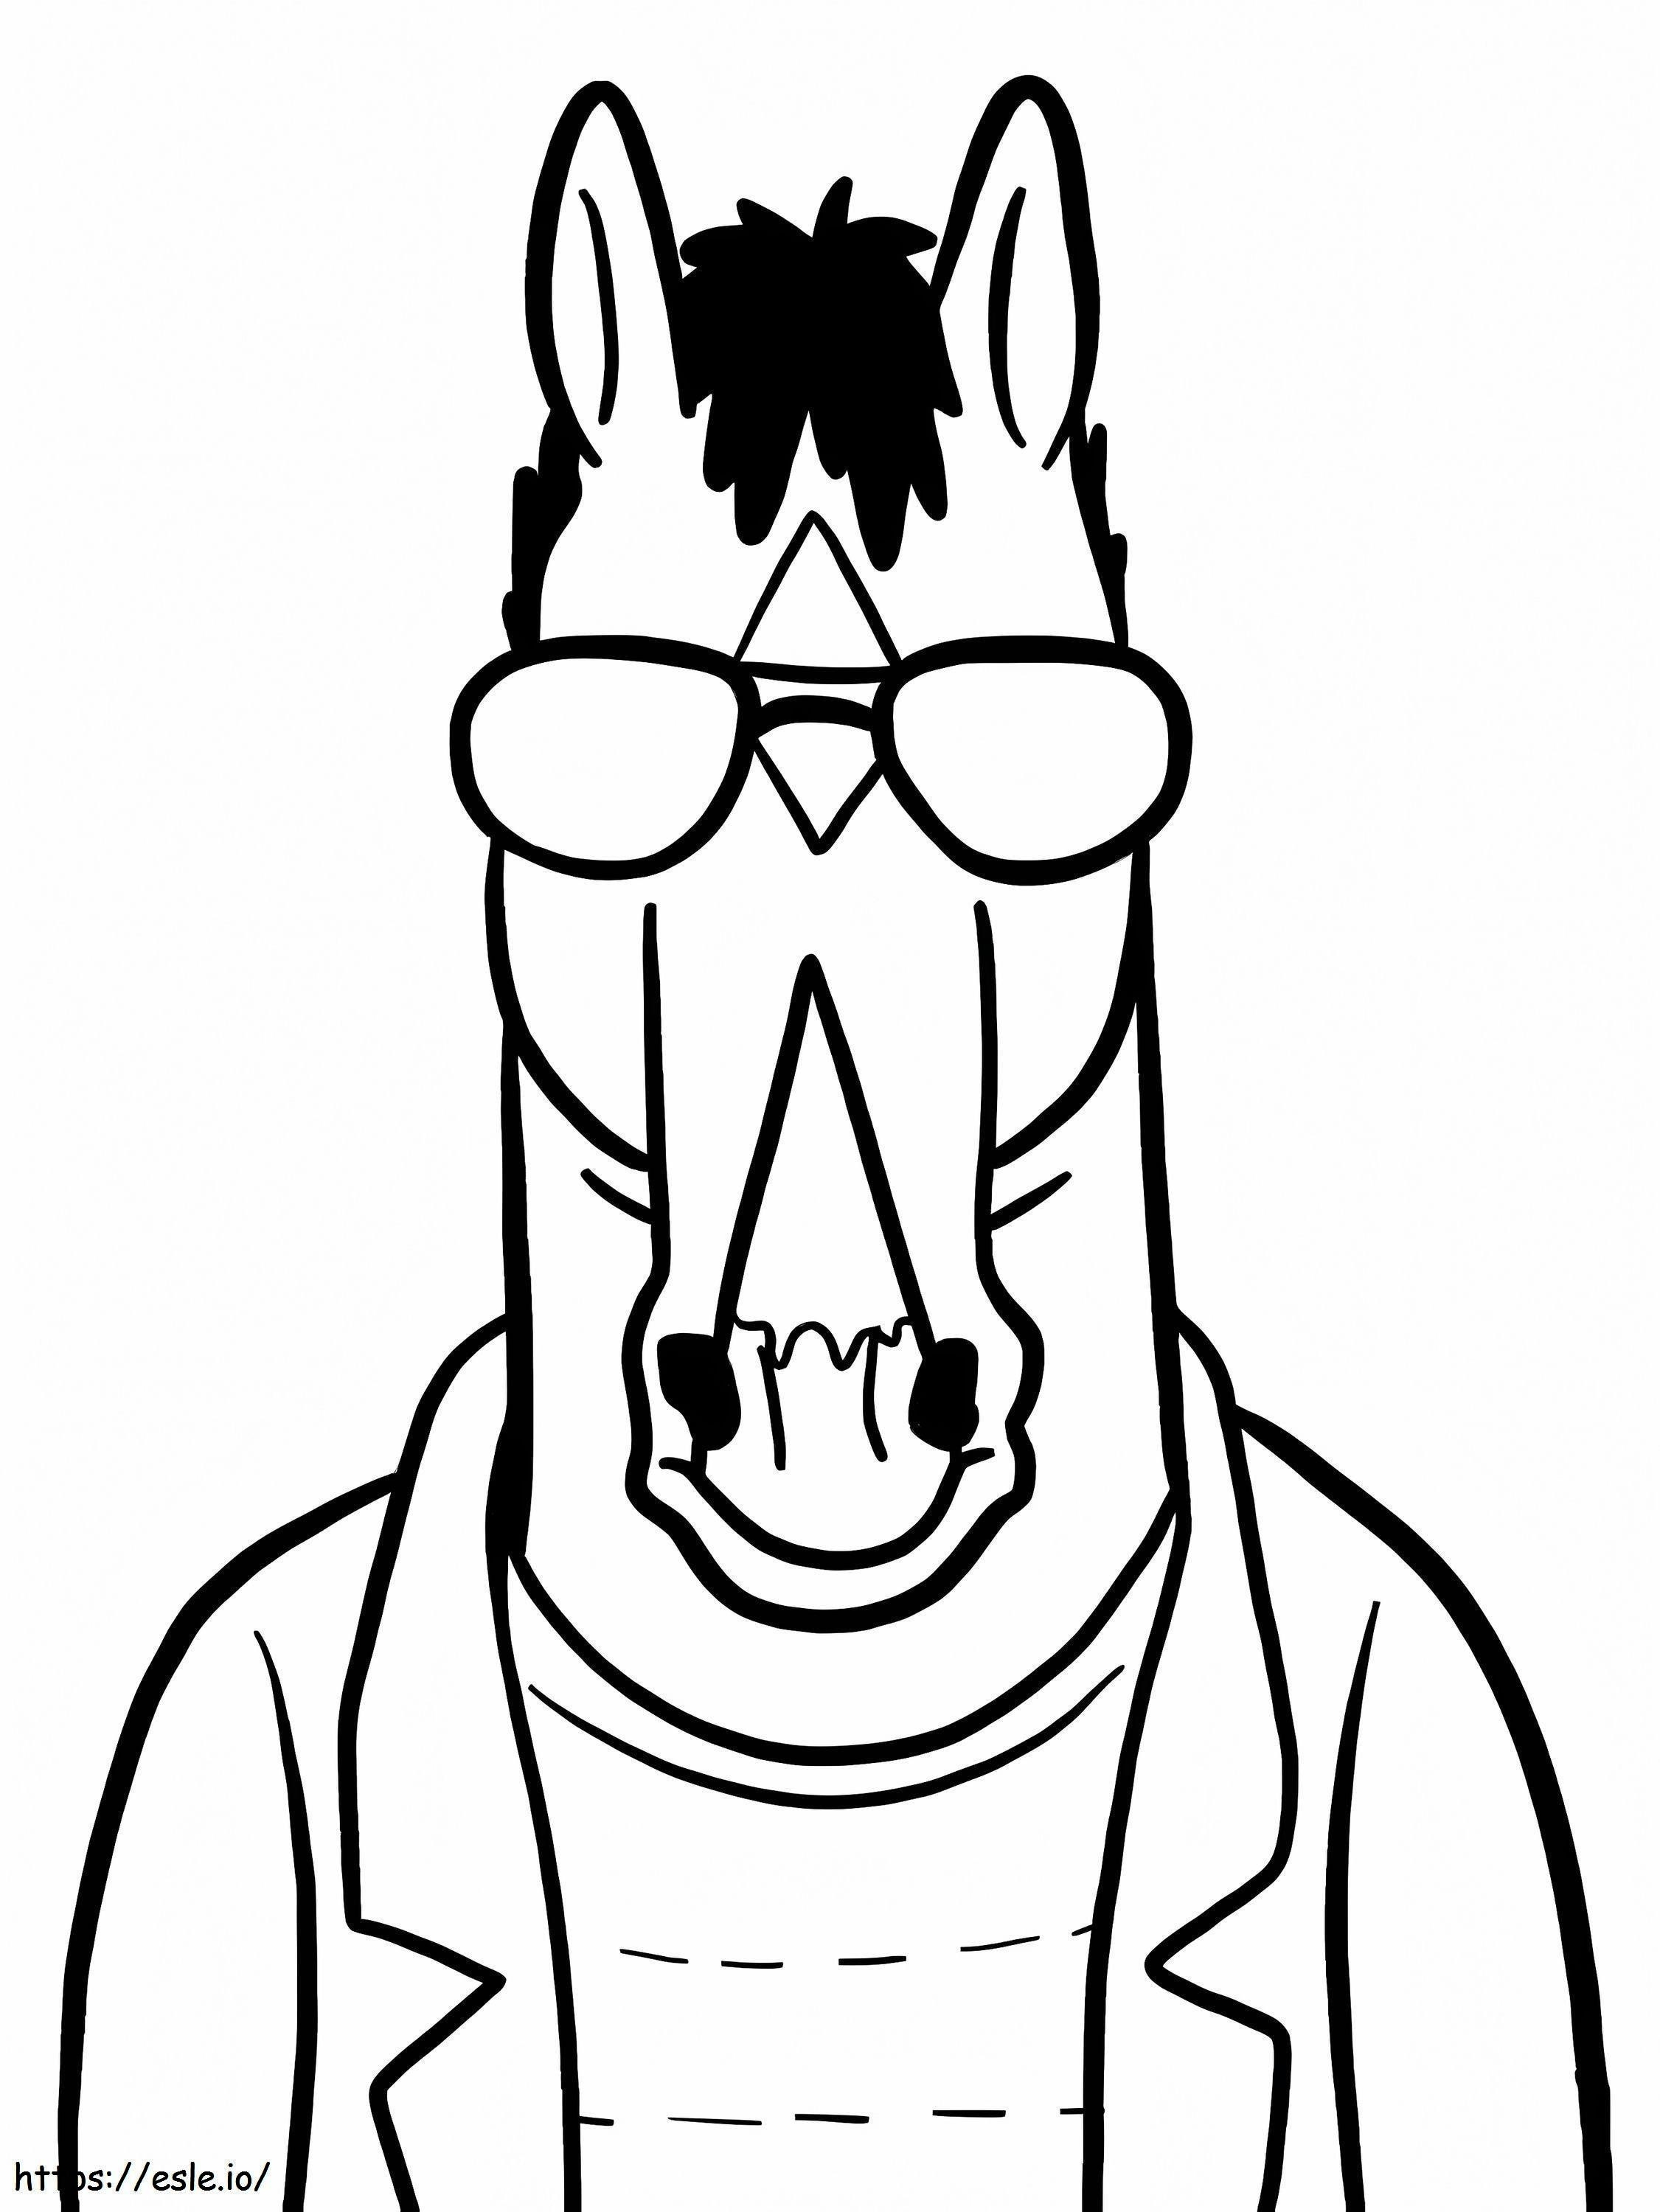 Bojack Horseman With Sunglasses coloring page